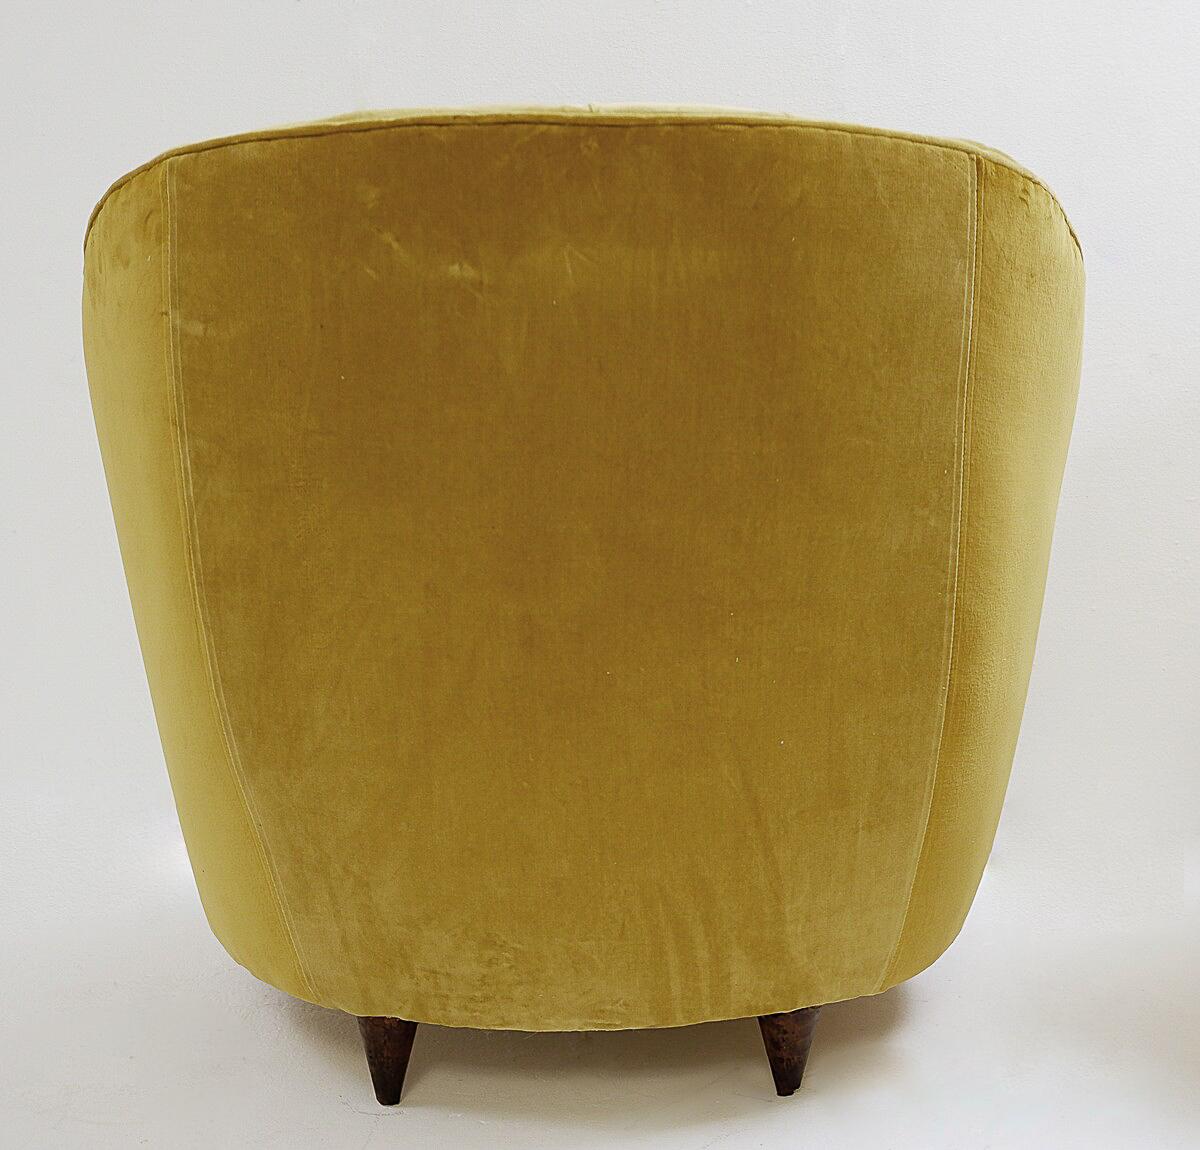  Pair of Velvet Armchairs in the style of Gio Ponti, Italy, 1950s For Sale 4